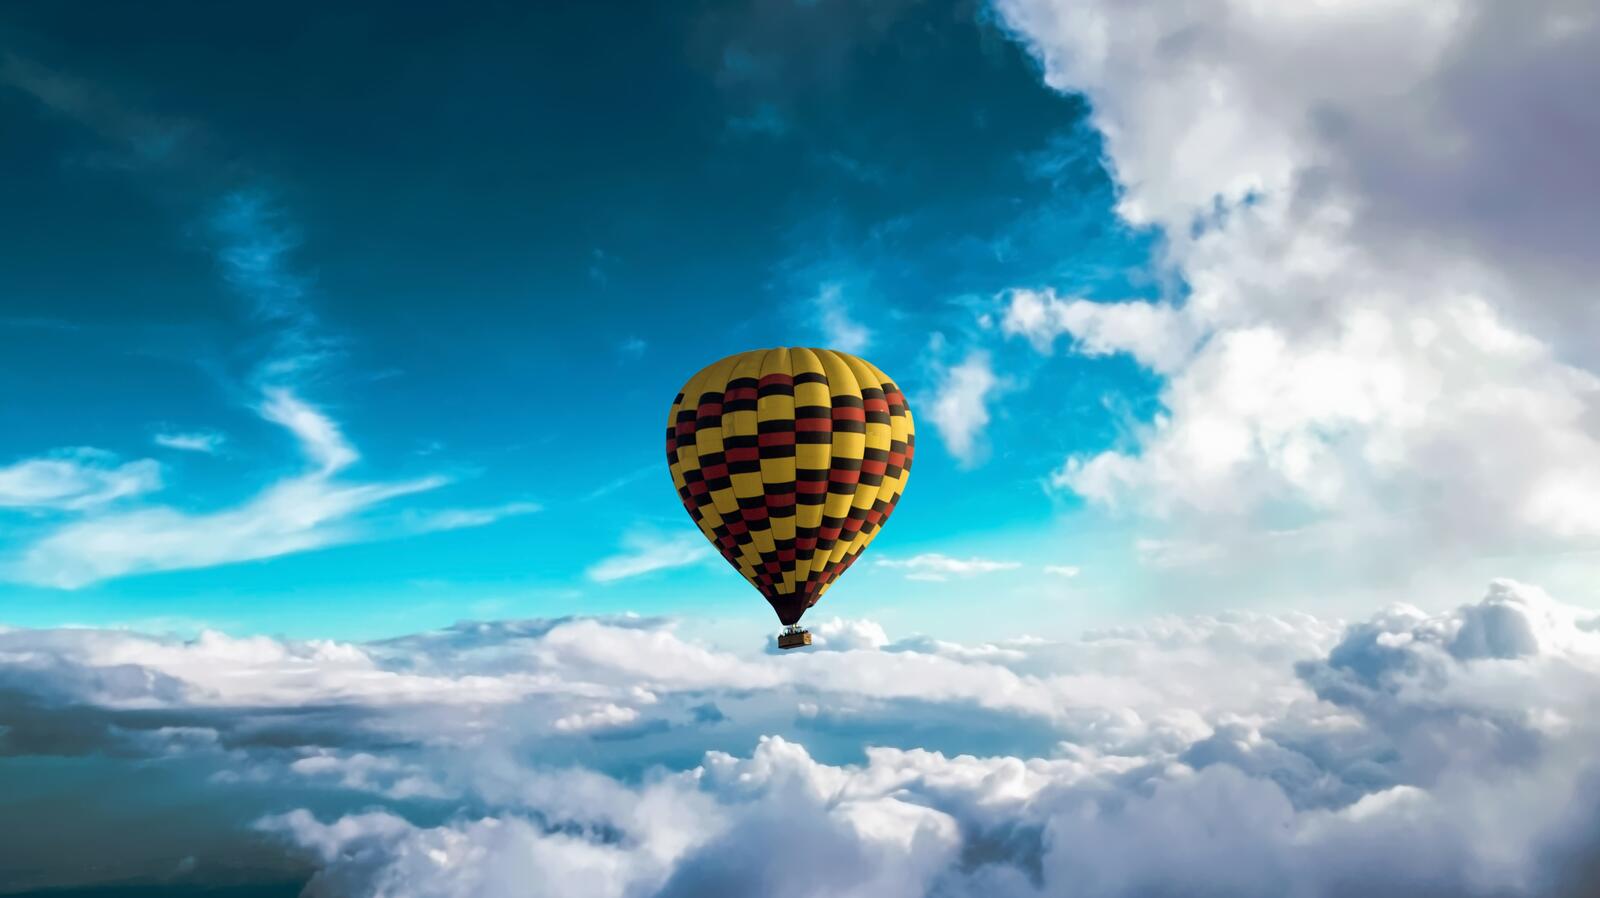 Wallpapers balloon clouds sky on the desktop